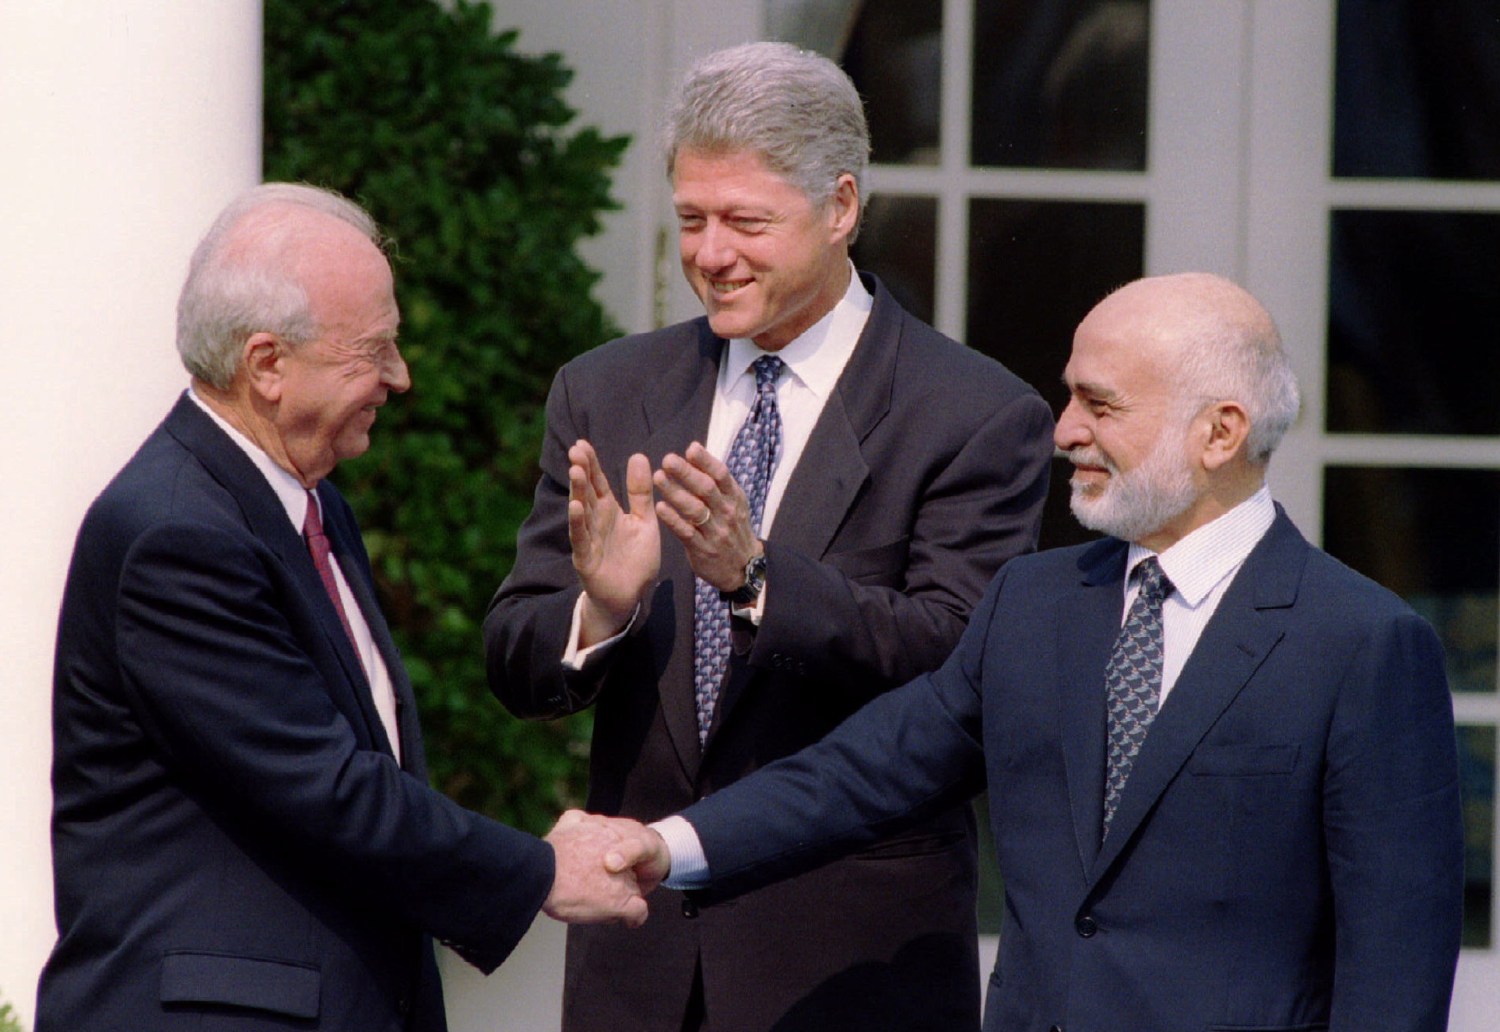 25 years on, remembering the path to peace for Jordan and Israel | Brookings